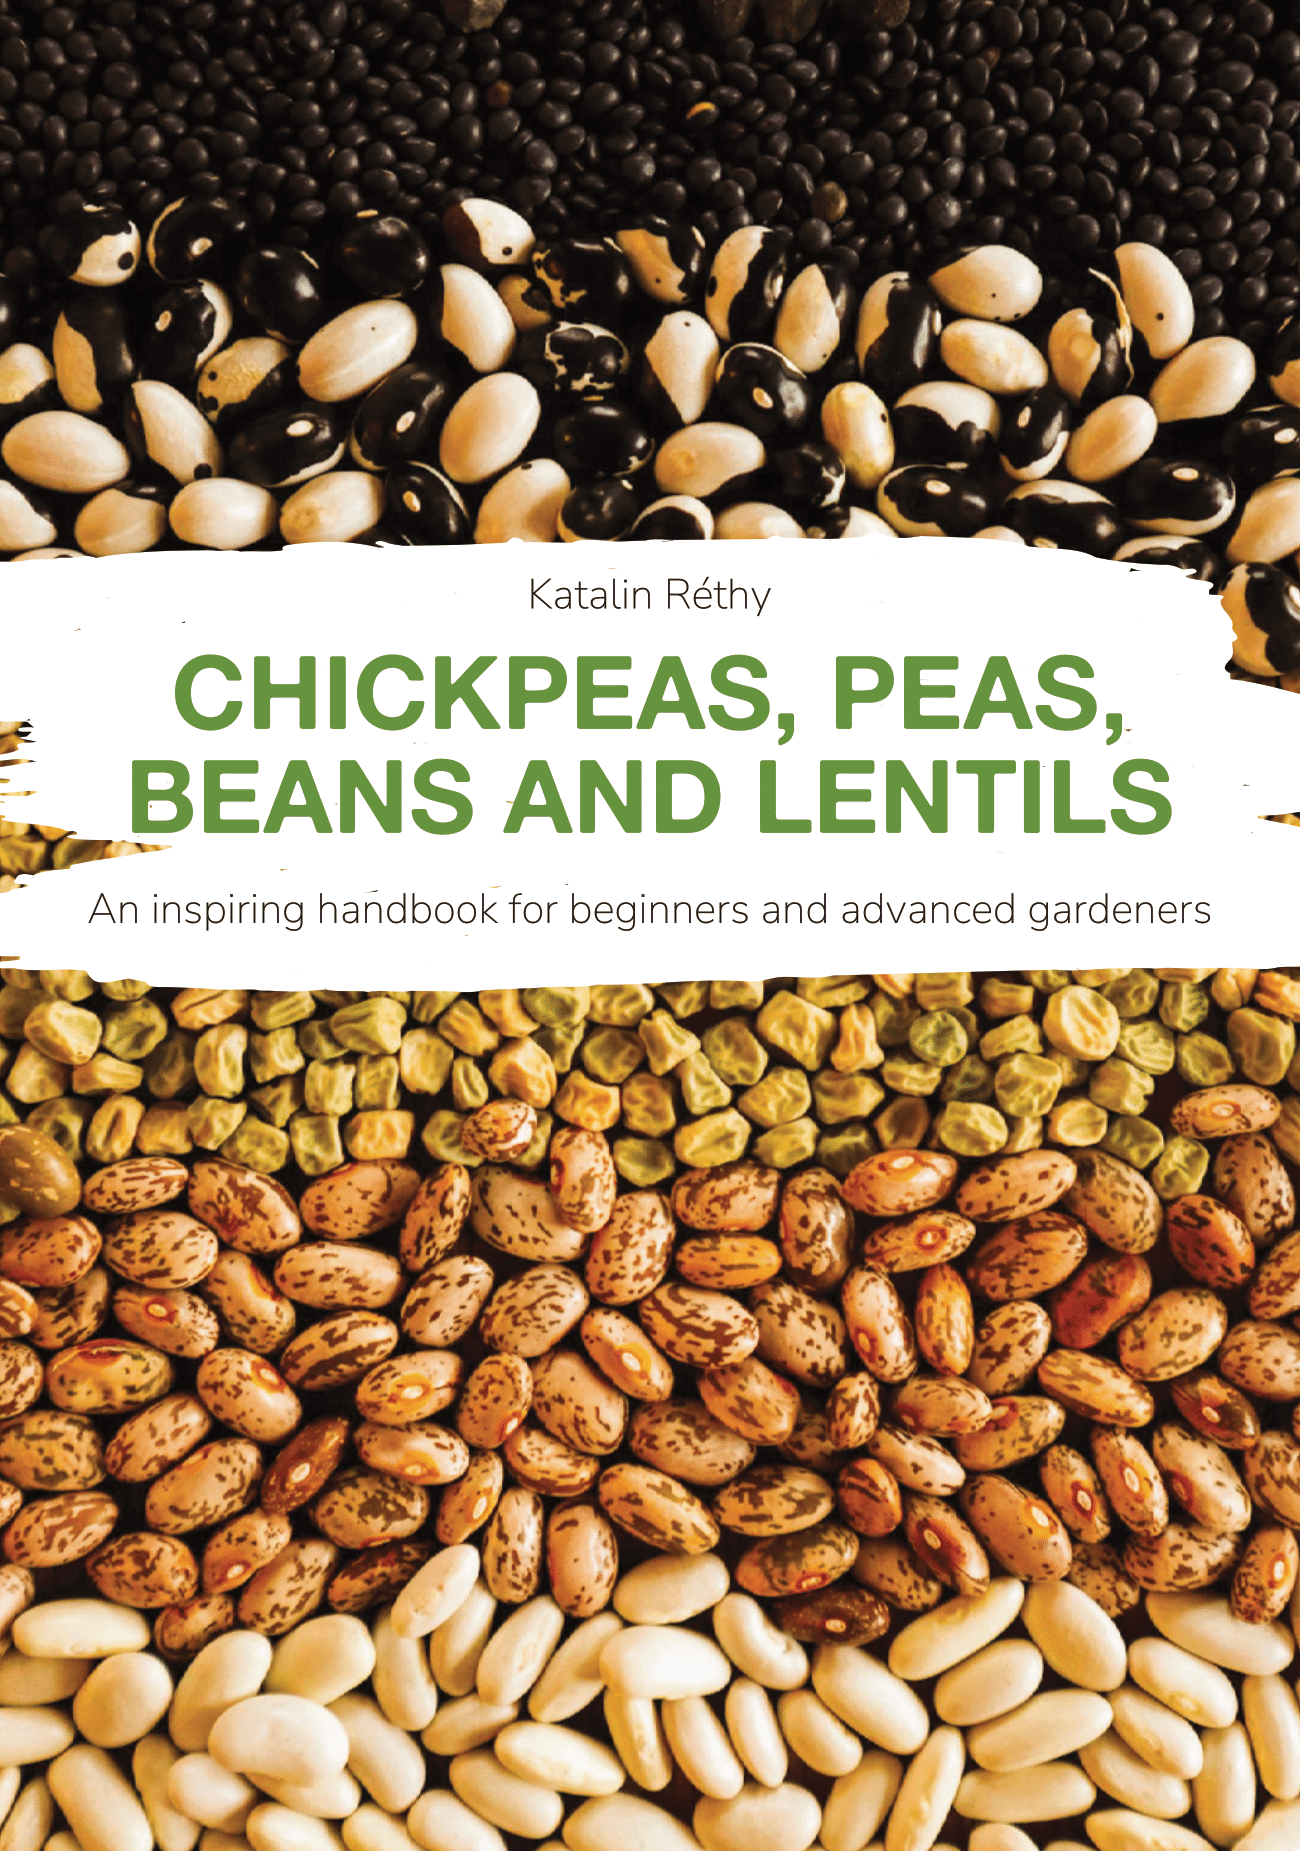 Chickpeas, Peas, Beans and Lentils-1-1